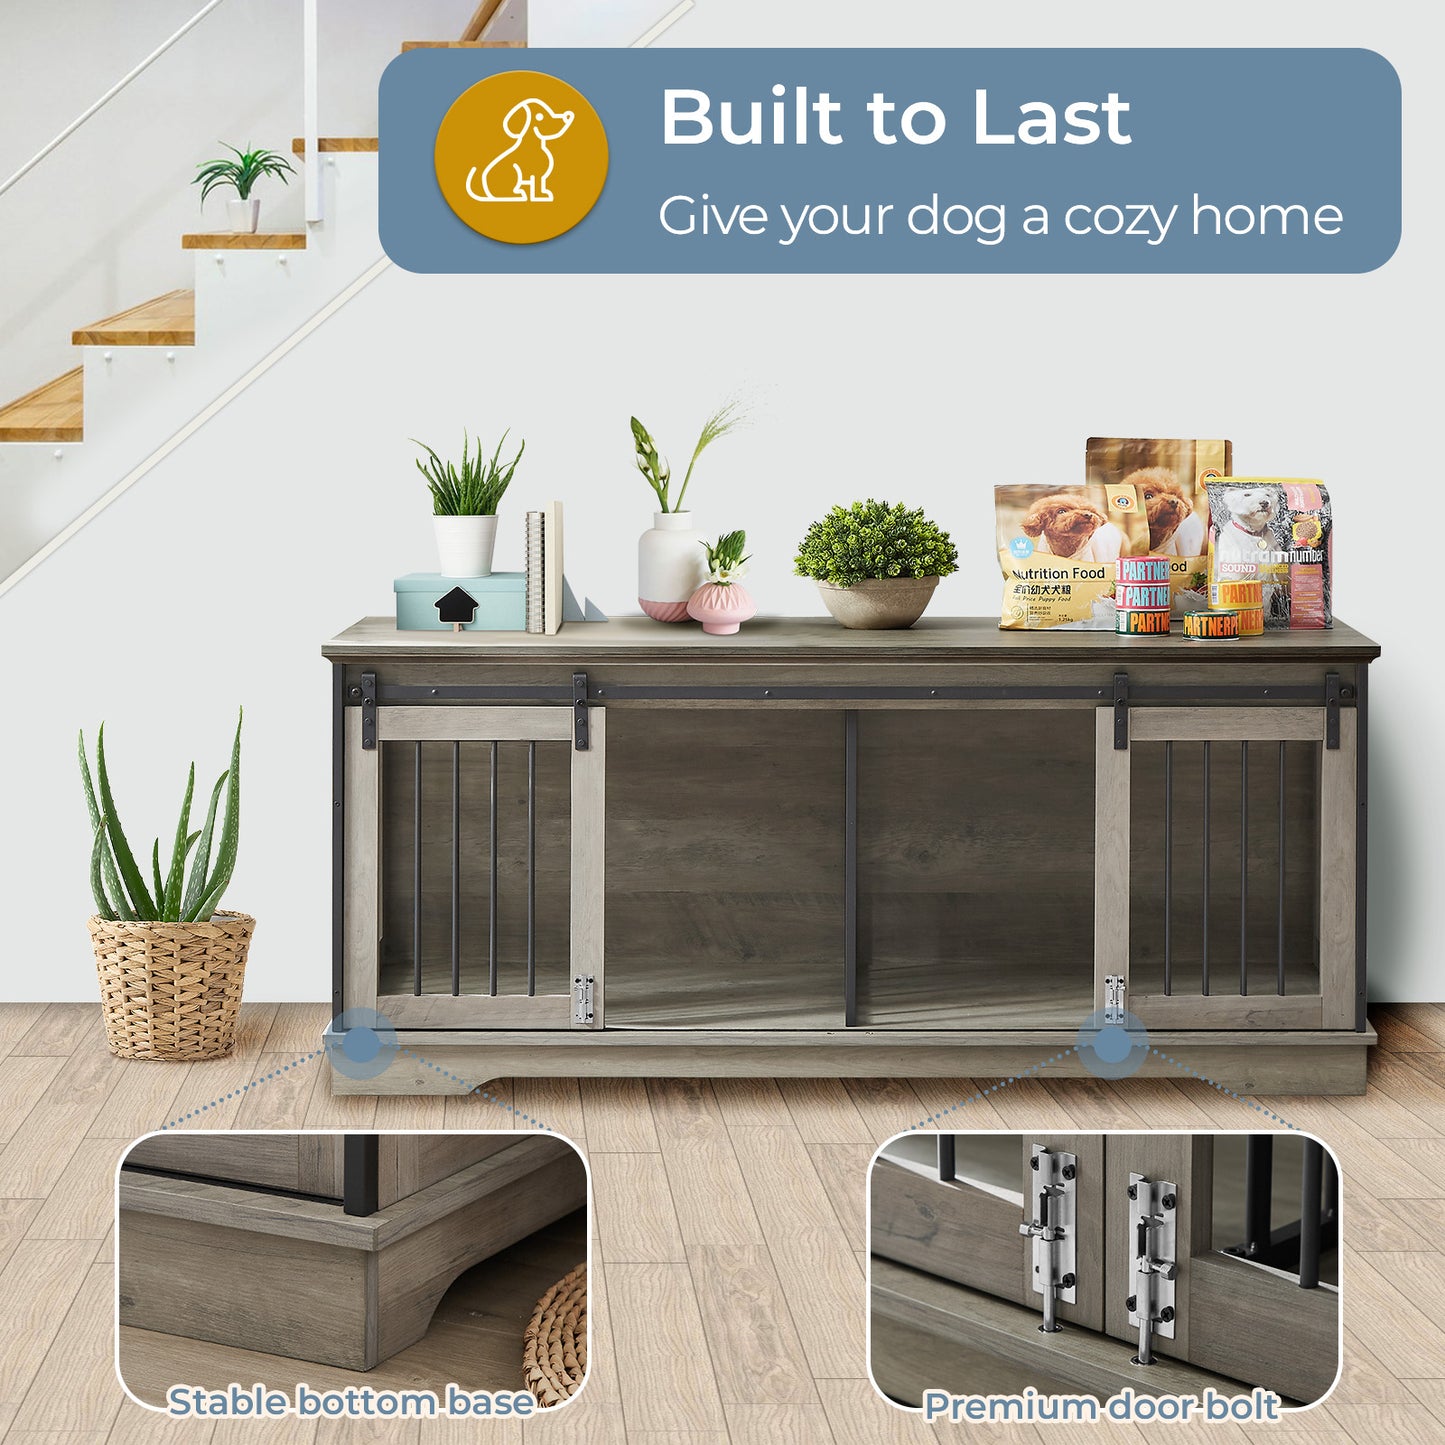 Lyromix Dog Crate Furniture Large Breed TV Stand with 2 Sliding Doors, Dog Kennels and Crates for Medium Large Dogs with Divider, Wood Dog Crate End Table, Grey, 62.2''W*22.8''D*27''H